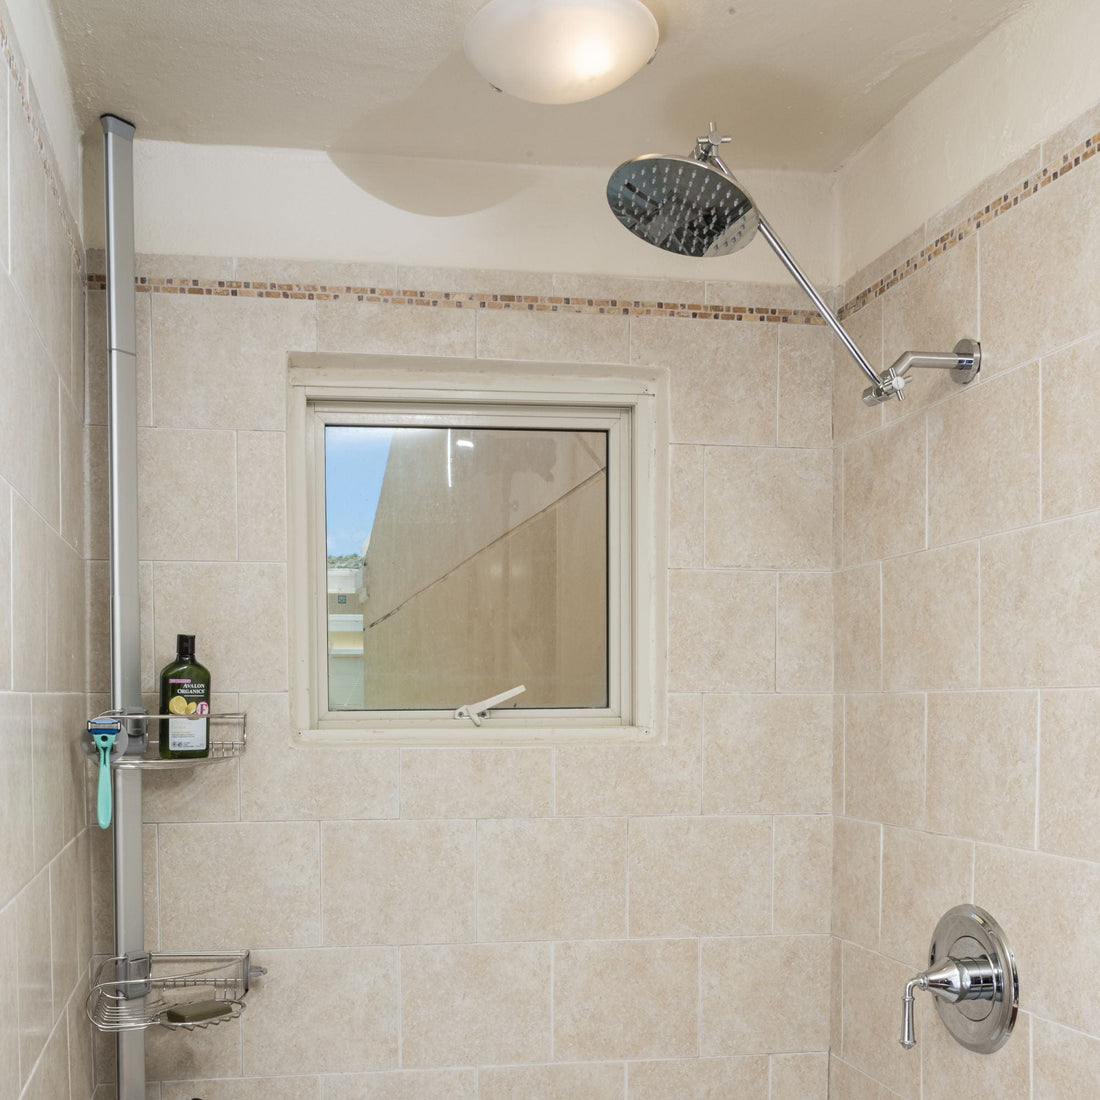 Chrome / 12 Inch Adjustable Shower Arm with Rain Shower Head in Bahtroom